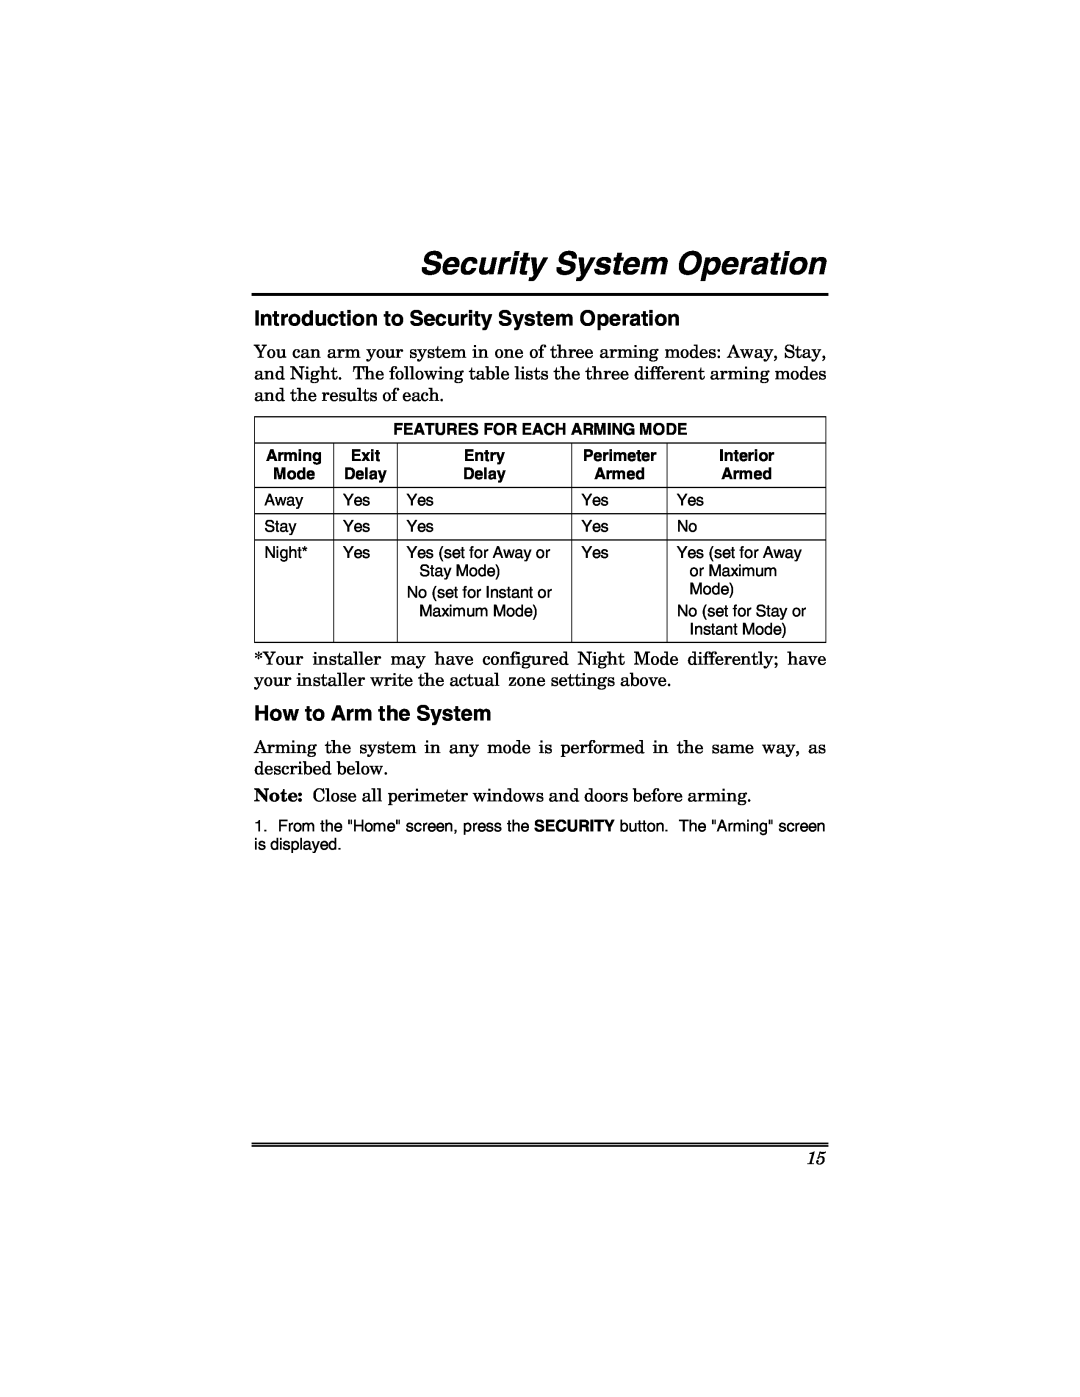 Honeywell 6271 manual Introduction to Security System Operation, How to Arm the System 